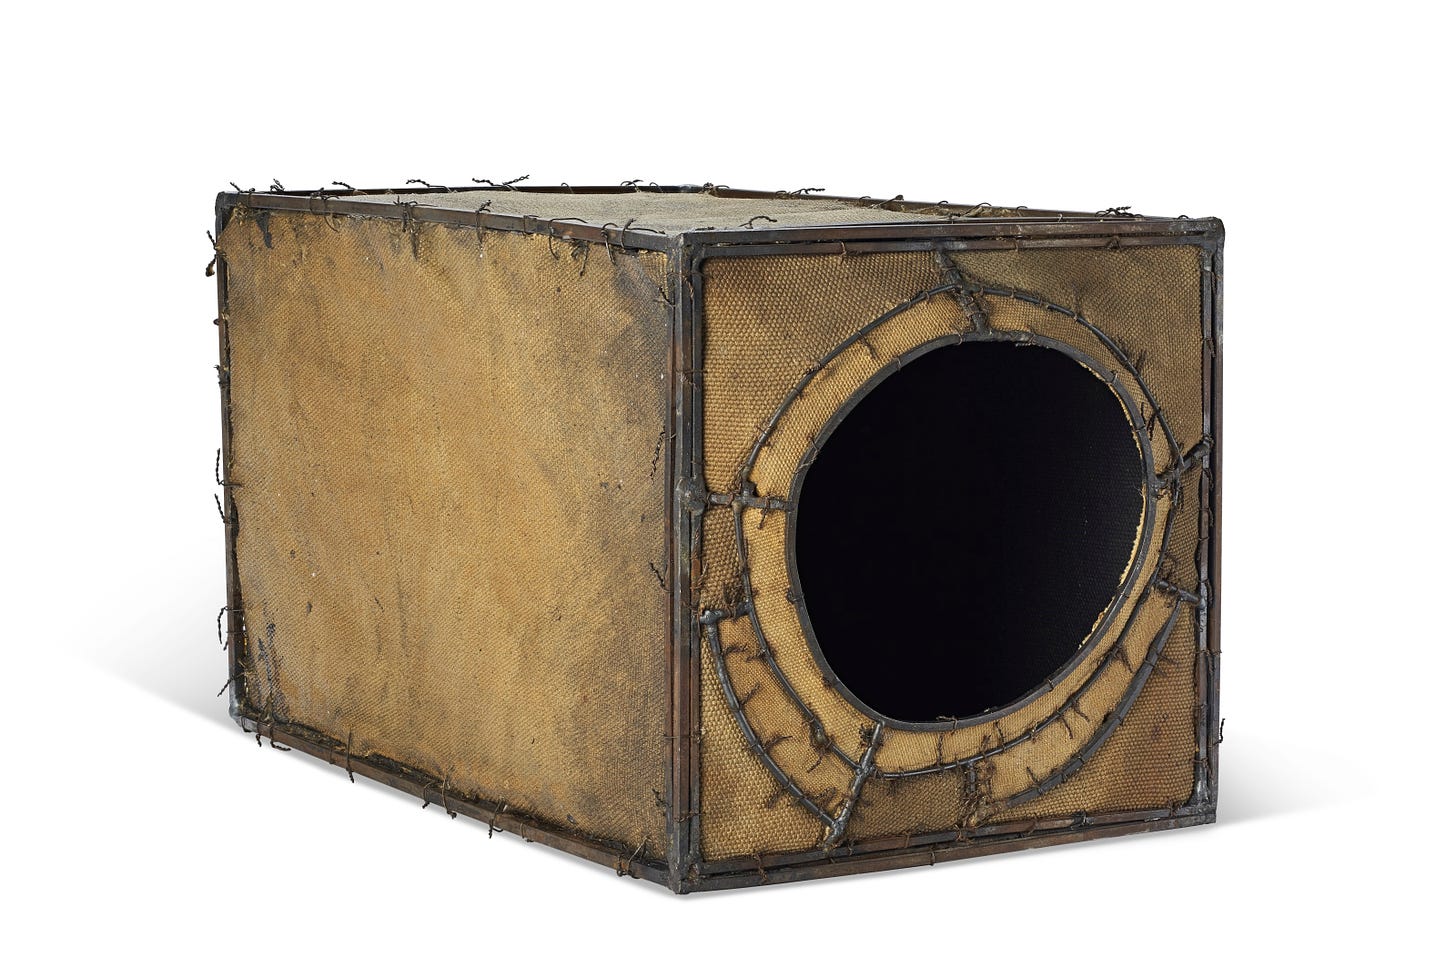 Artwork by Lee Bontecou, Untitled, Made of welded steel, canvas and wire